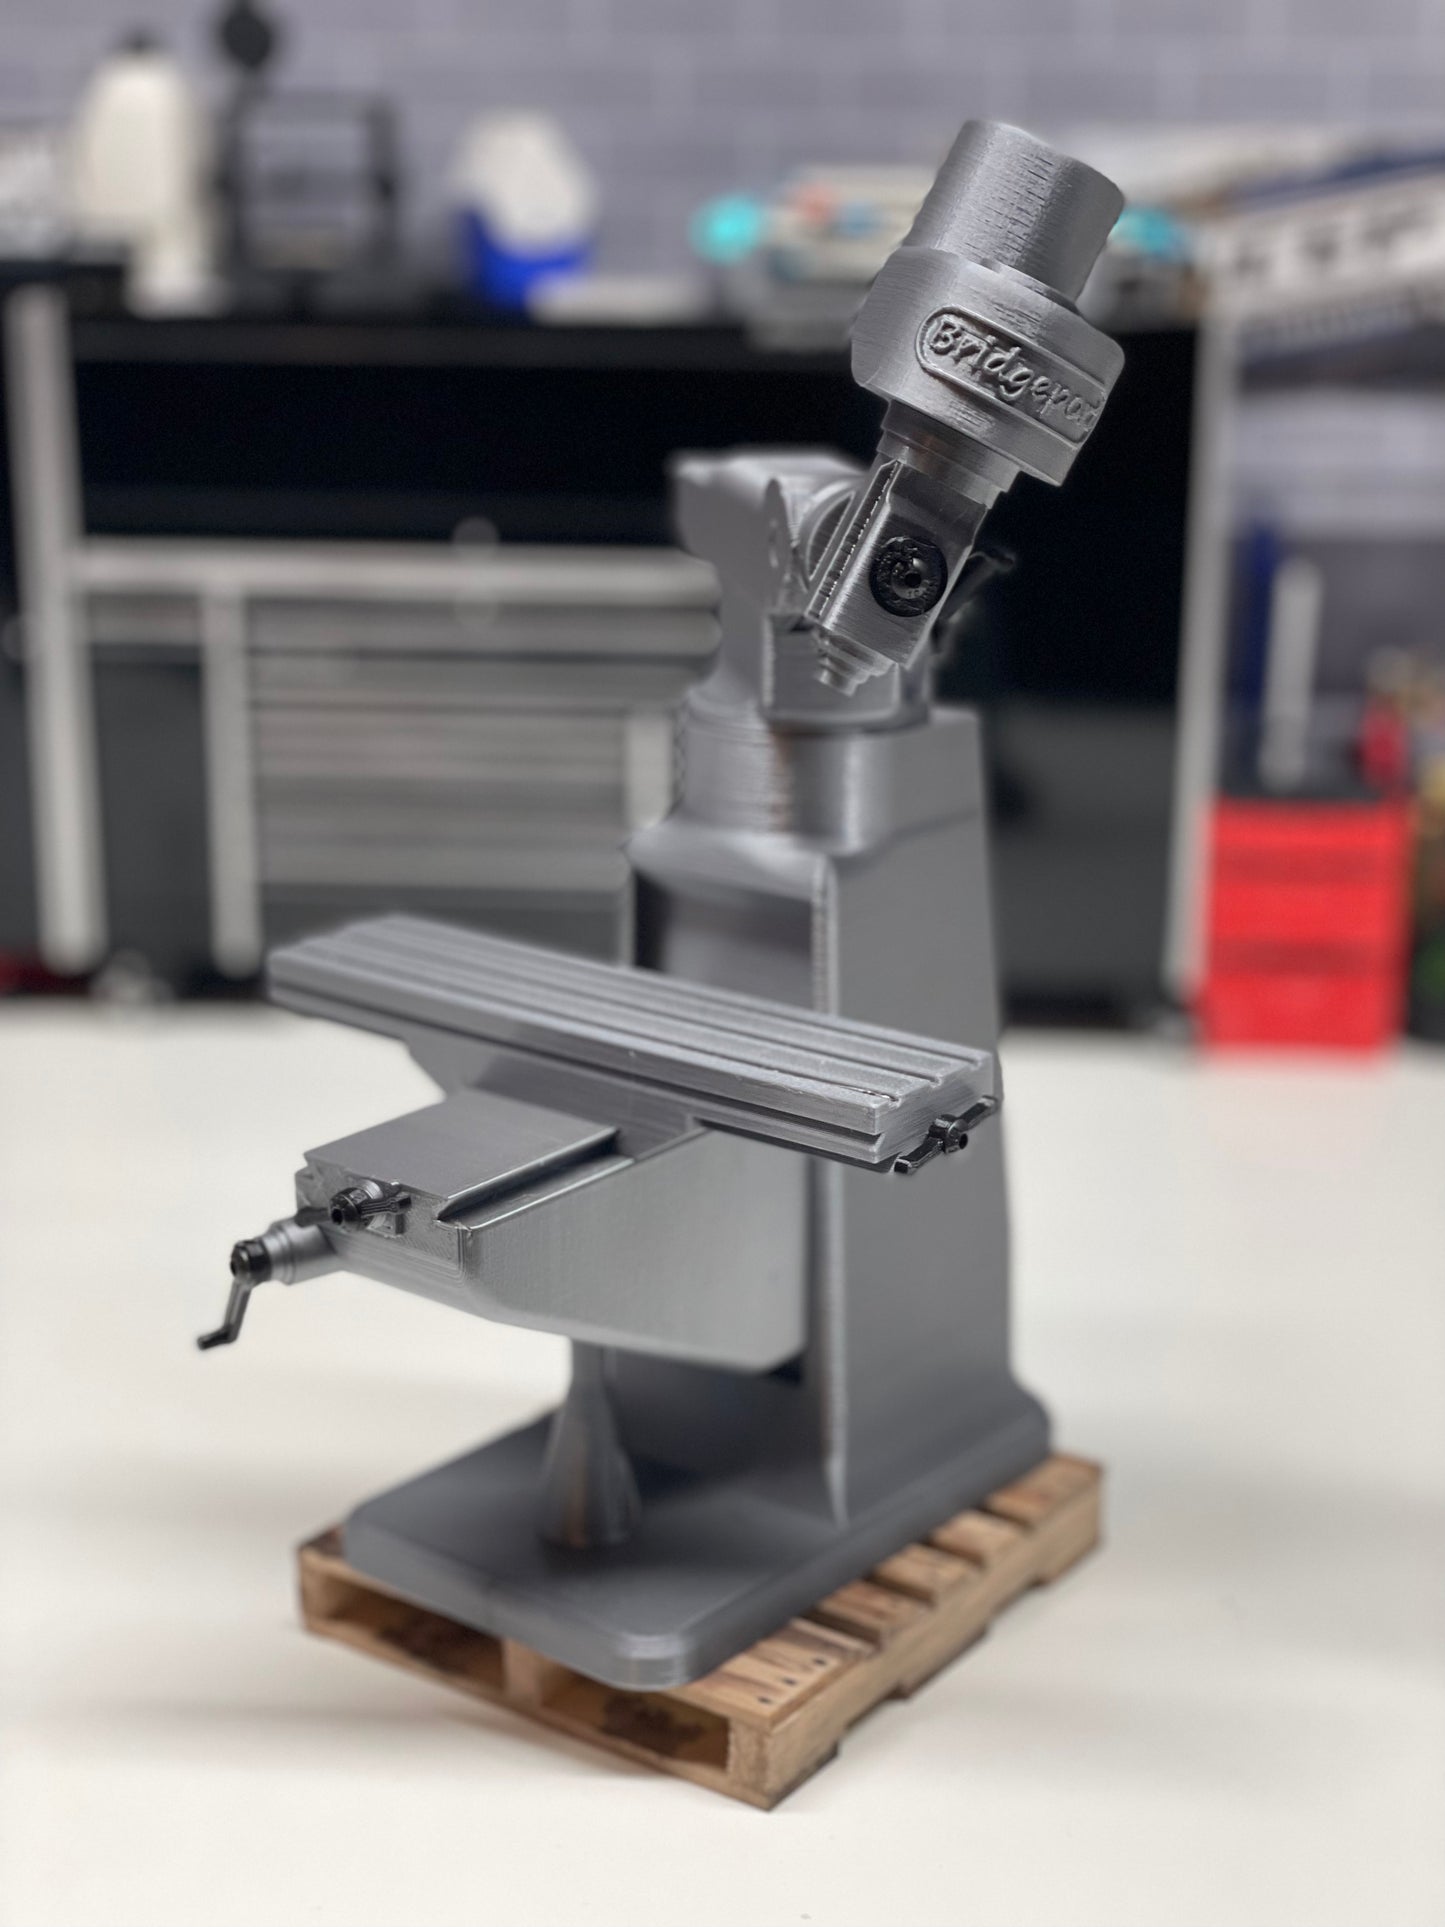 1/10 Scale “Bridgeport” CNC Mill for your Scale Garage